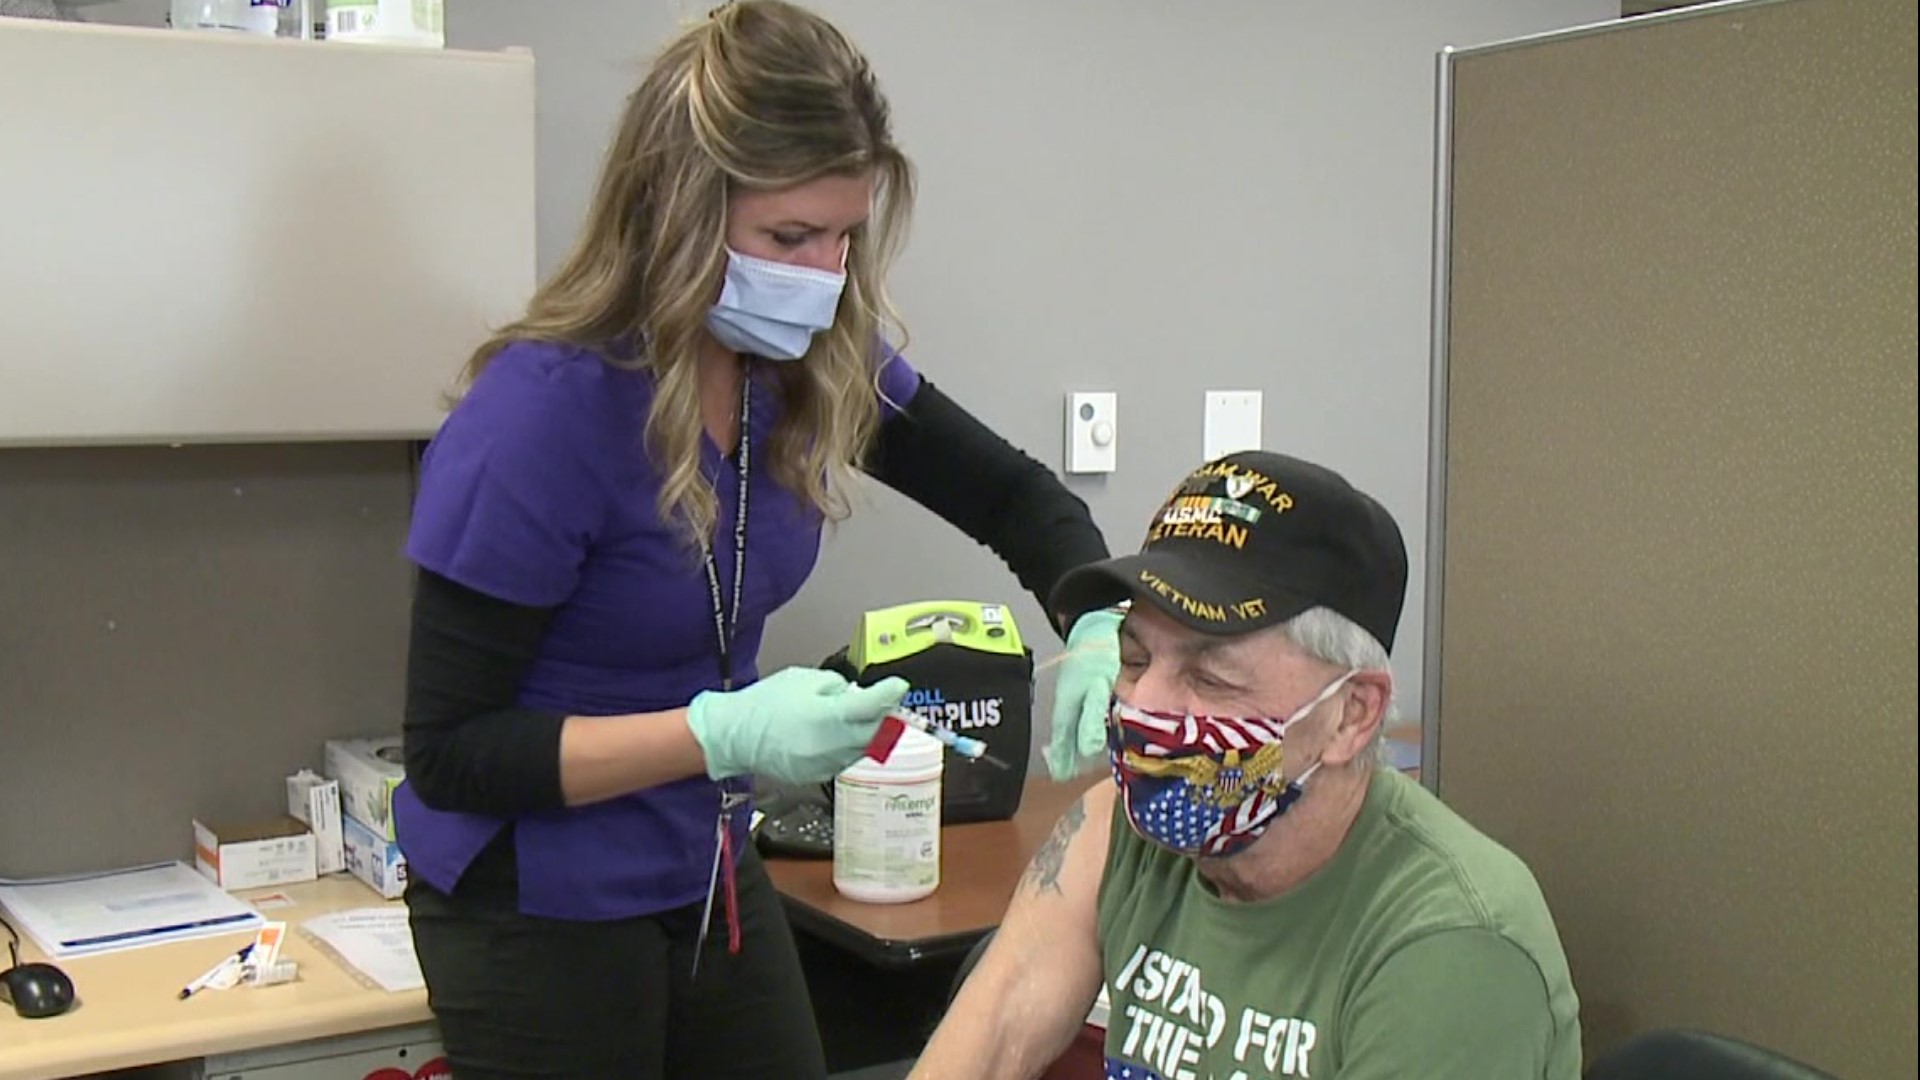 Regardless of your age or underlying health conditions, if you are a veteran enrolled with the Wilkes-Barre VA Medical Center, you can now get your COVID-19 vaccine.